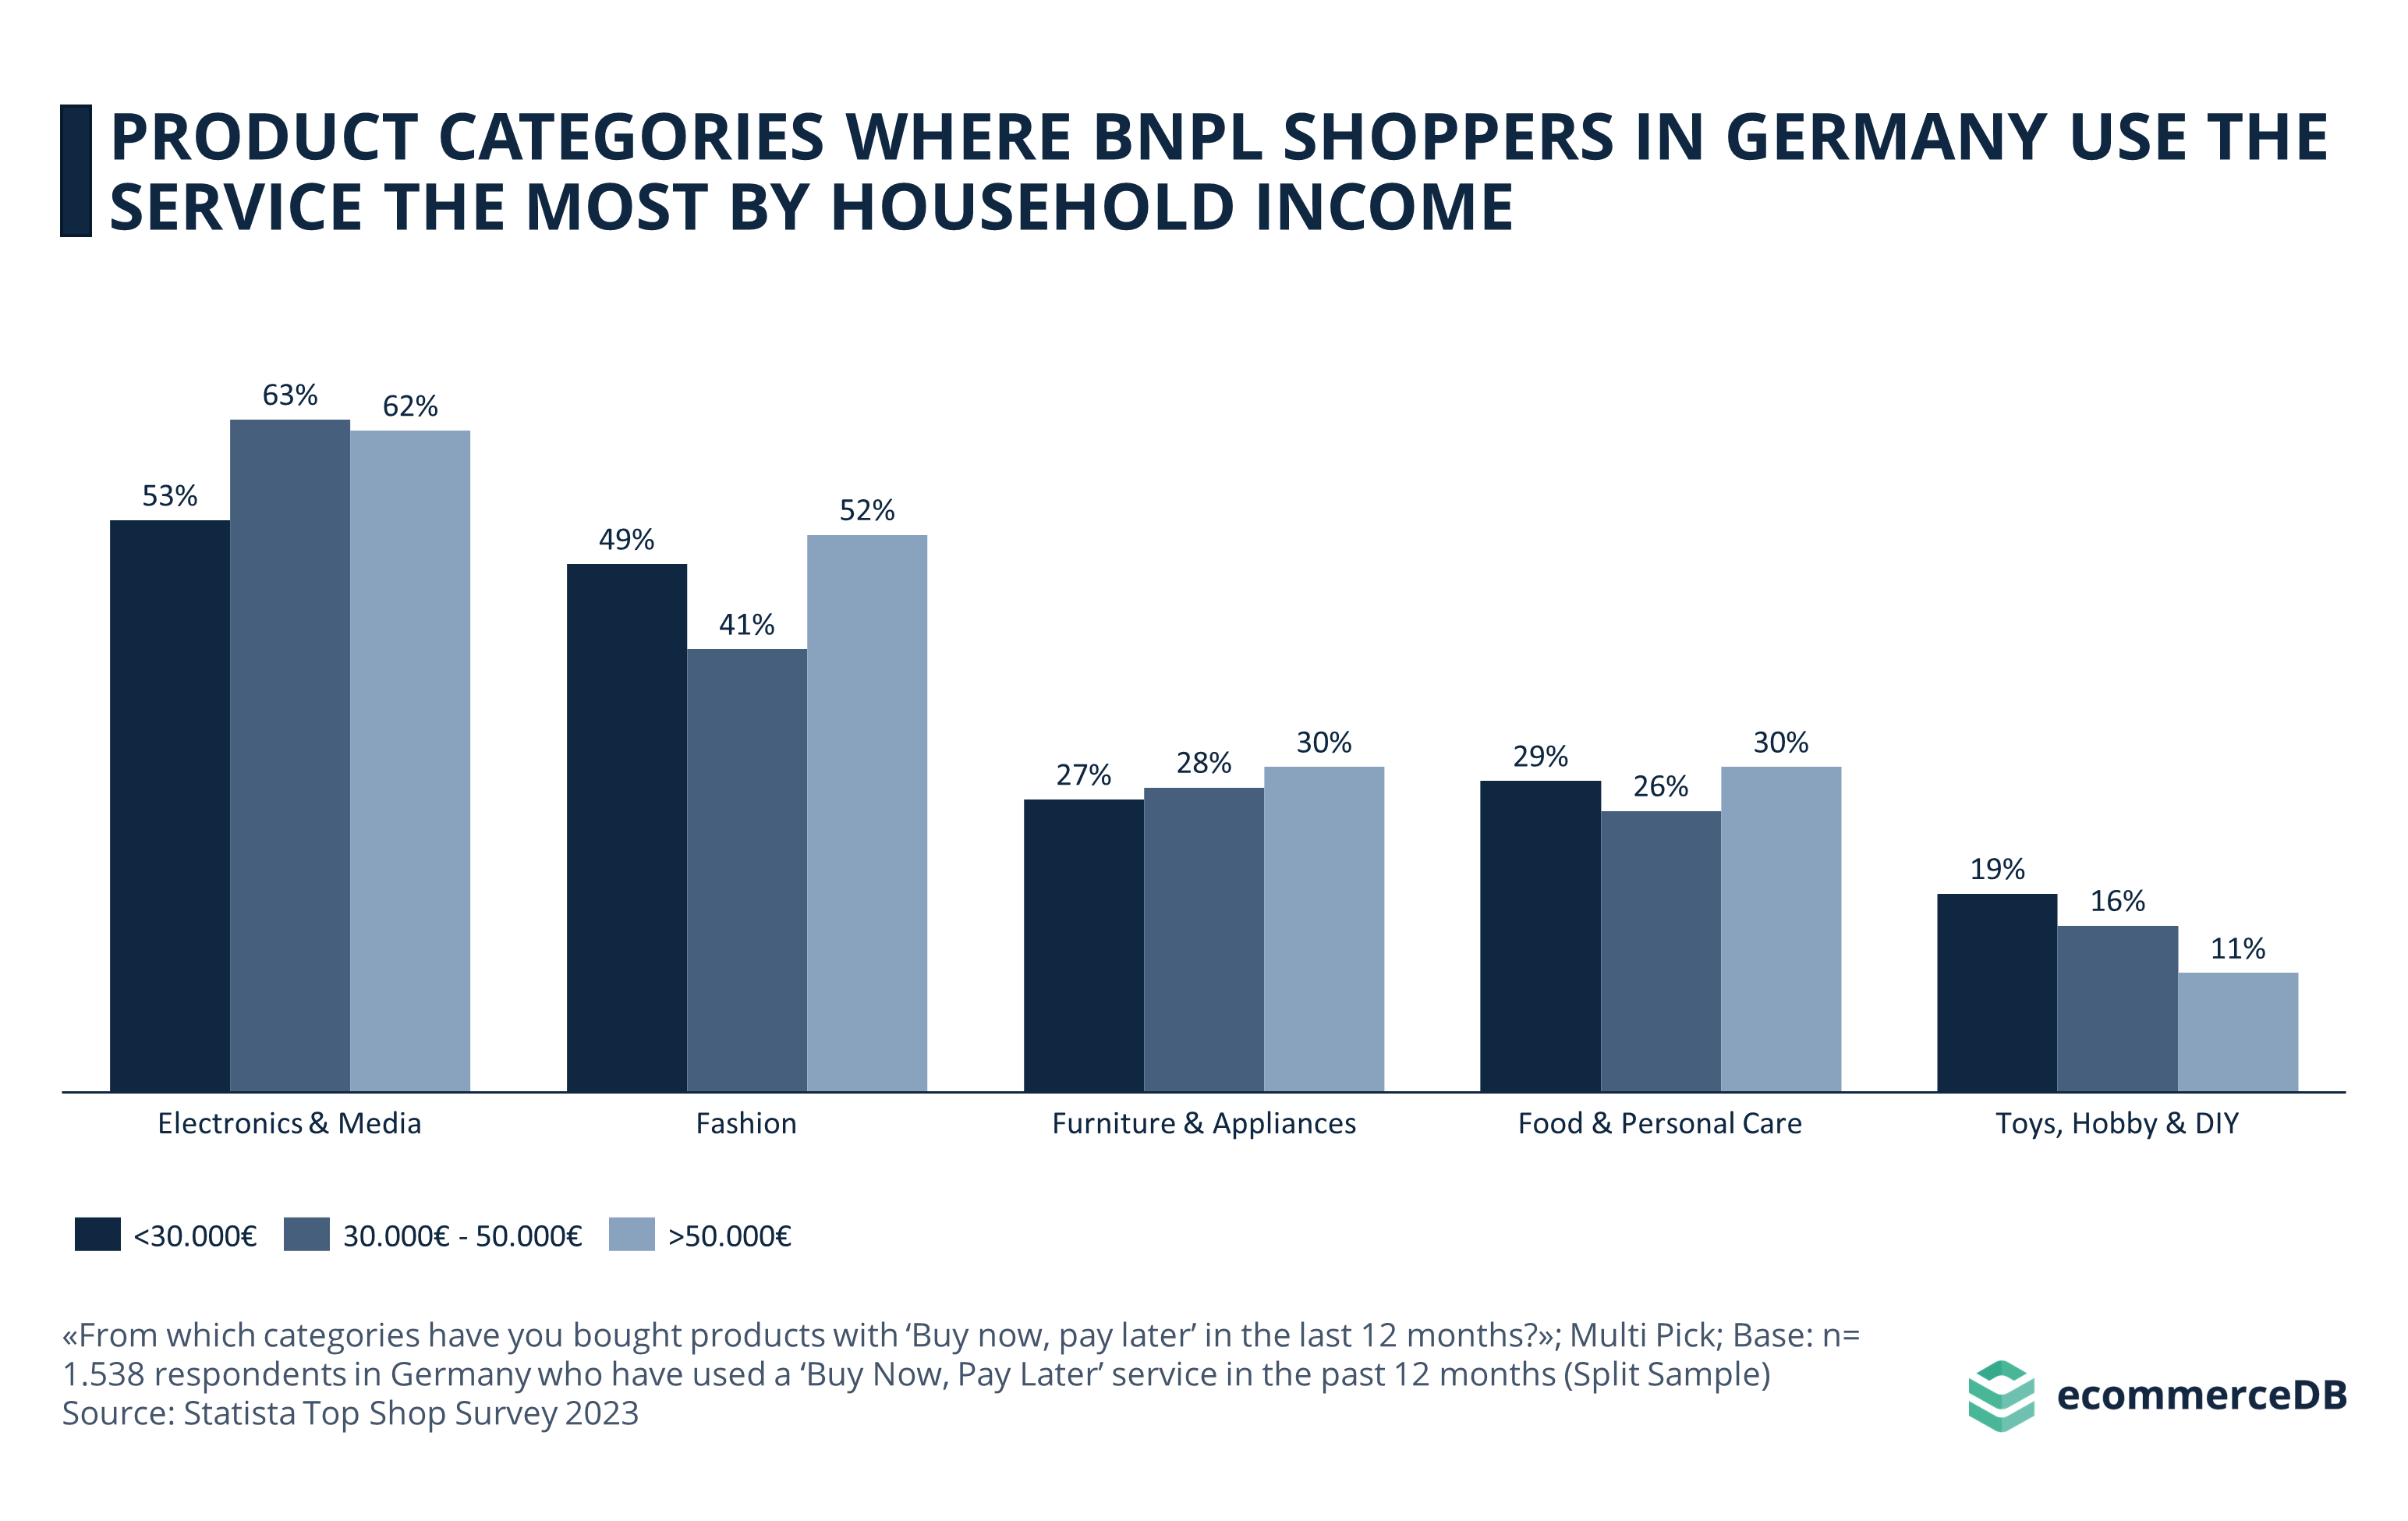 PRODUCT CATEGORIES WHERE BNPL SHOPPERS IN GERMANY USE THE SERVICE THE MOST BY HOUSEHOLD INCOME